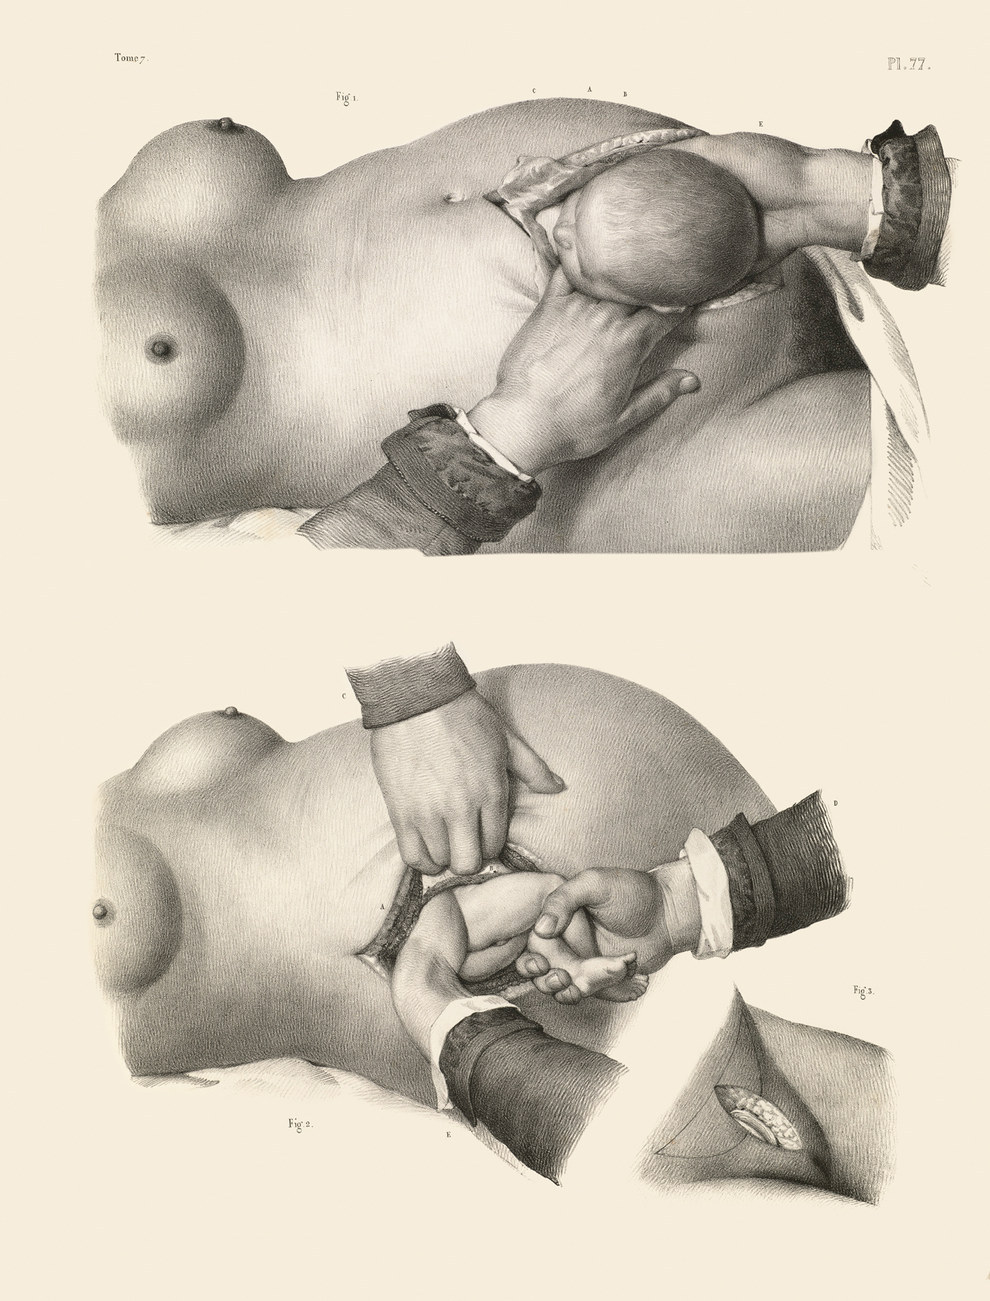 Two kinds of caesarian section.